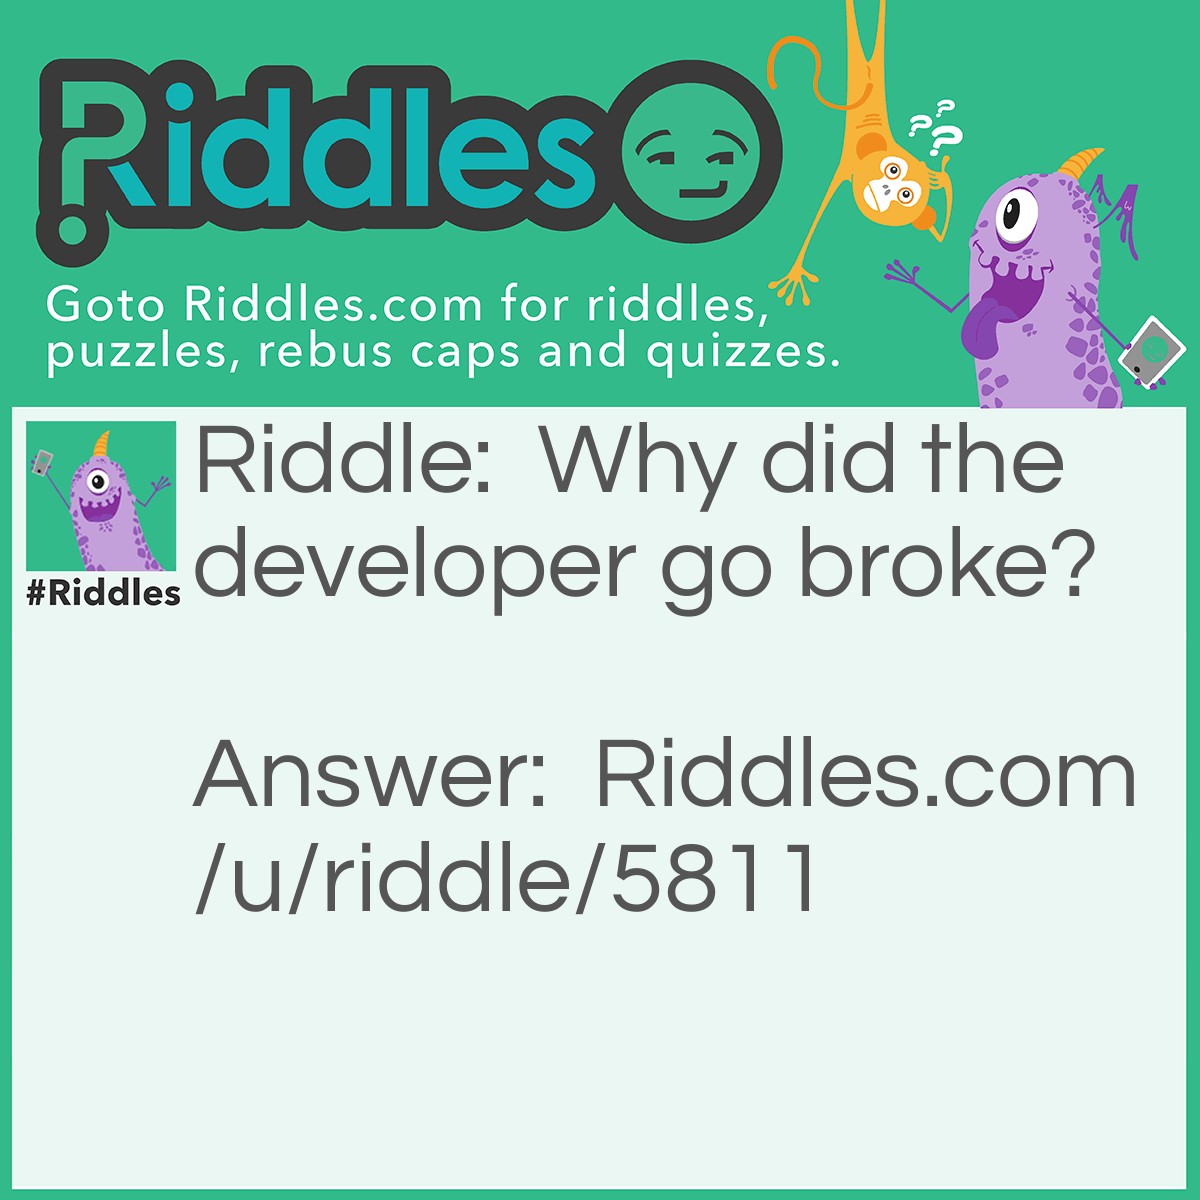 Riddle: Why did the developer go broke? Answer: Because he used up all his cache.